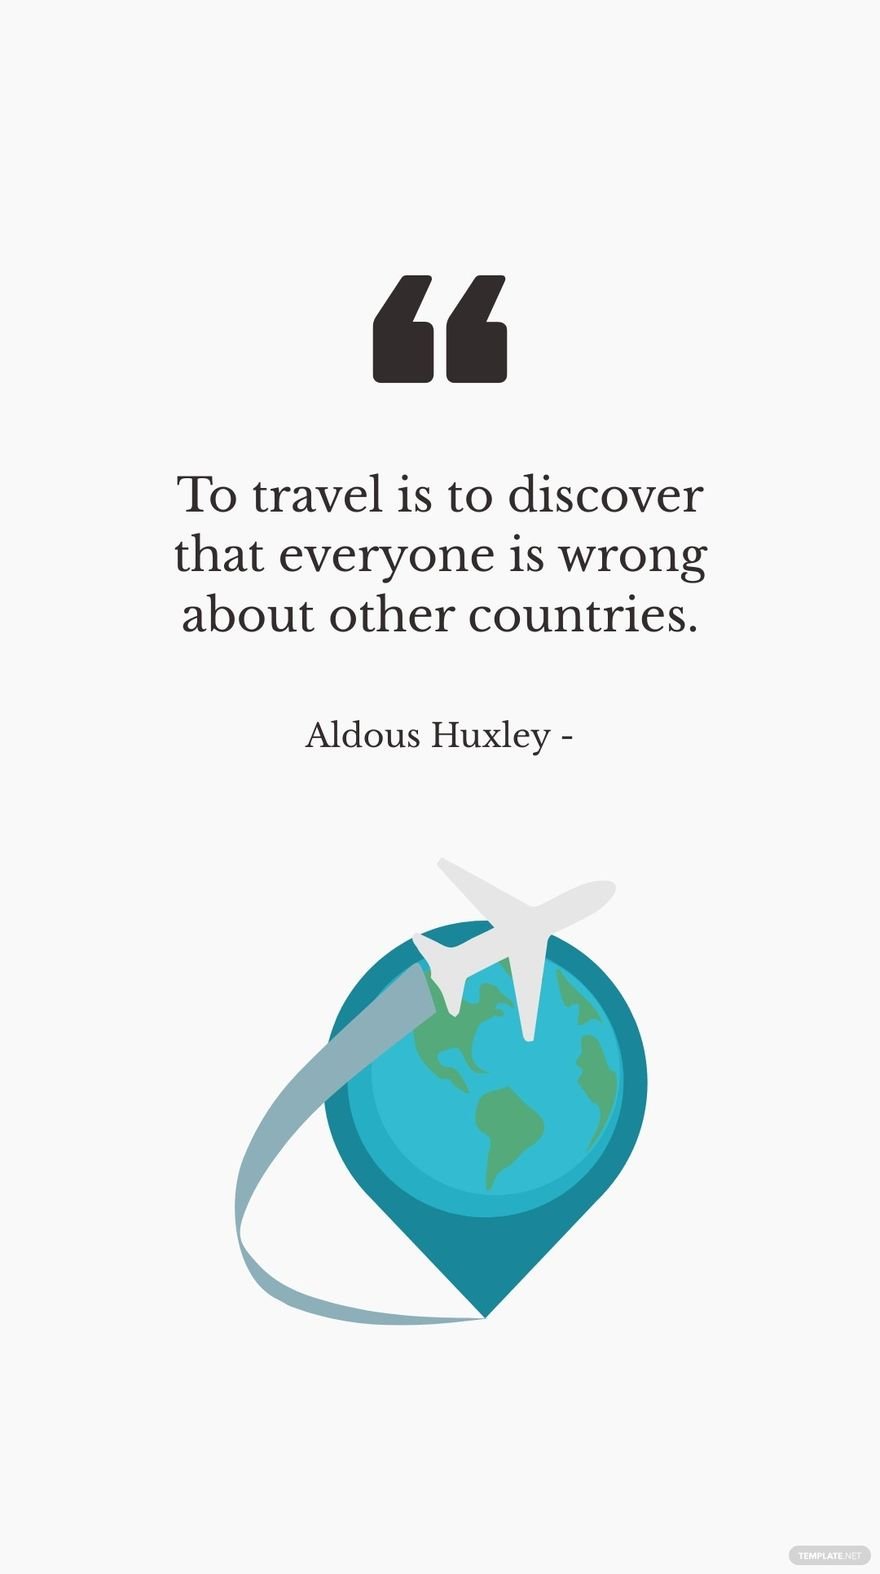 Aldous Huxley - To travel is to discover that everyone is wrong about other countries. in JPG